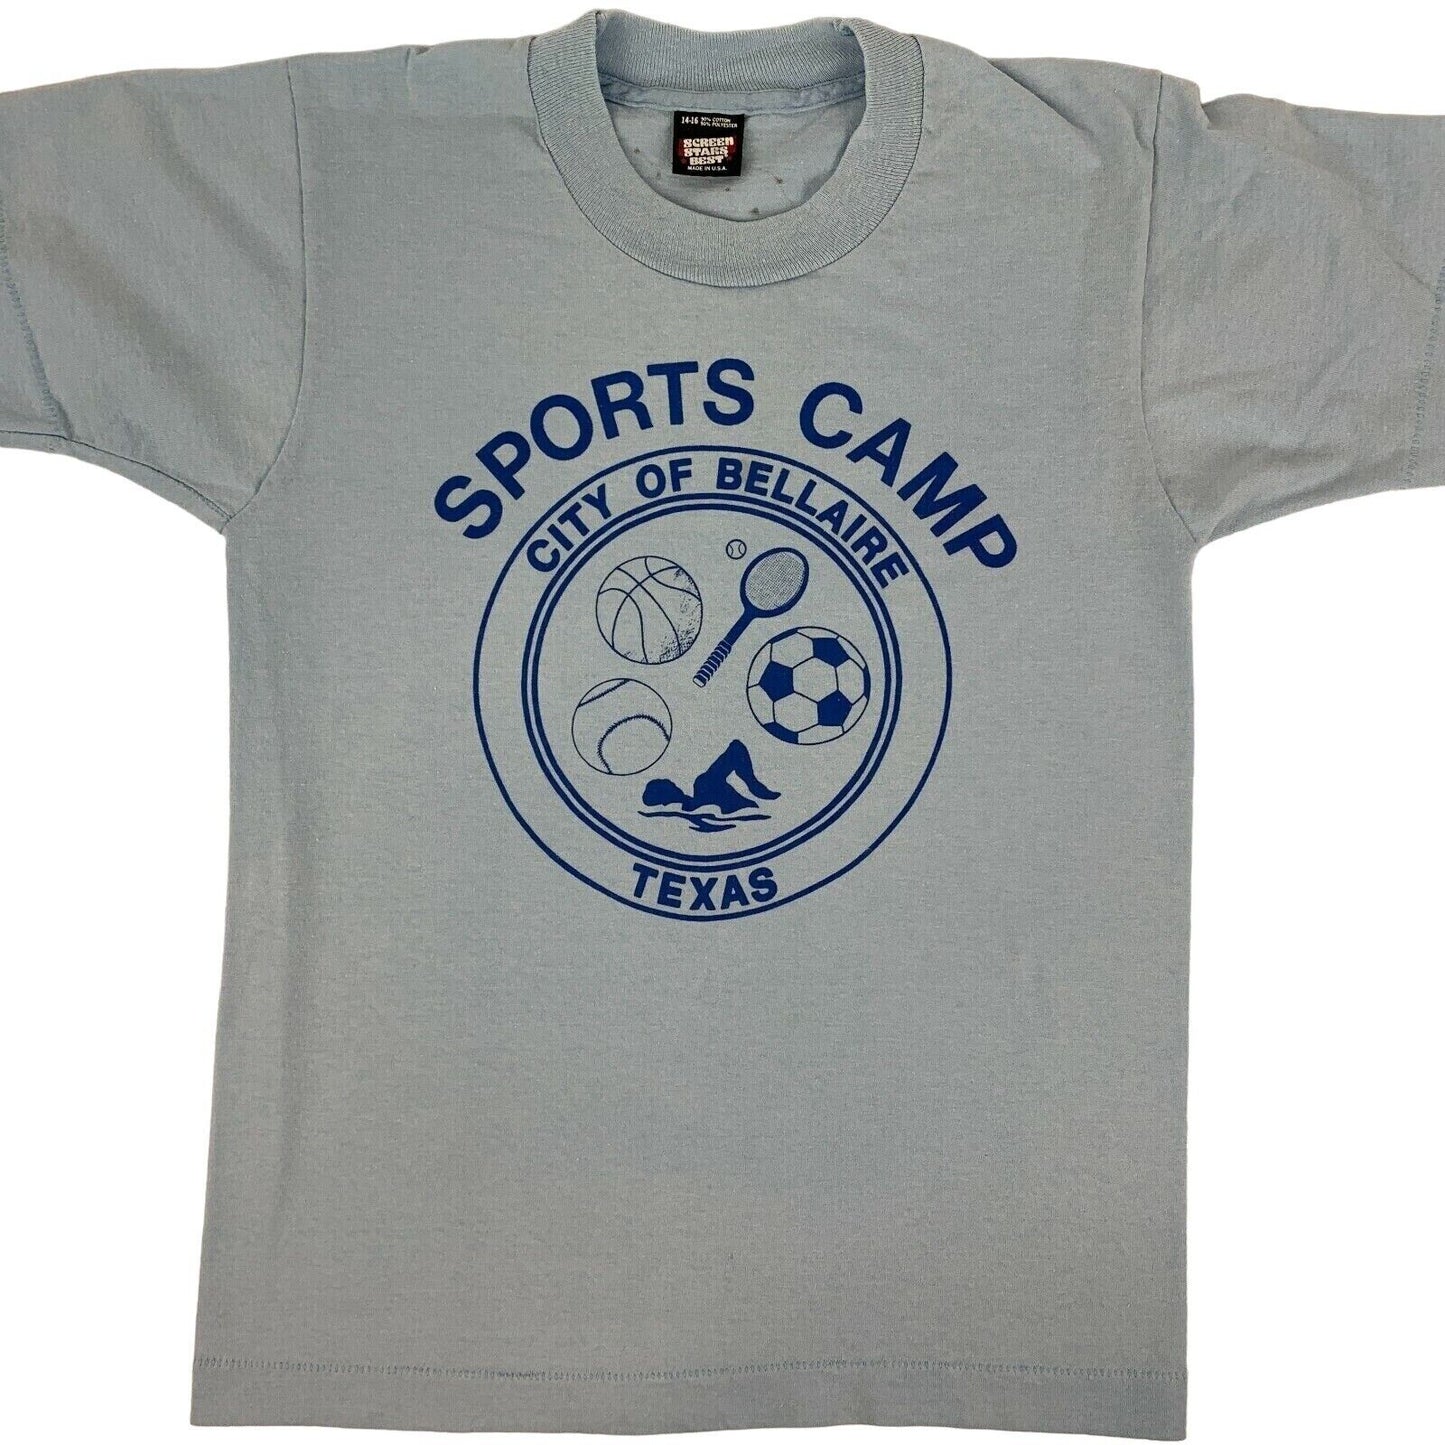 Sports Camp Bellaire Texas Vintage 80s Youth T Shirt 14-16 Eric Yelding Signed